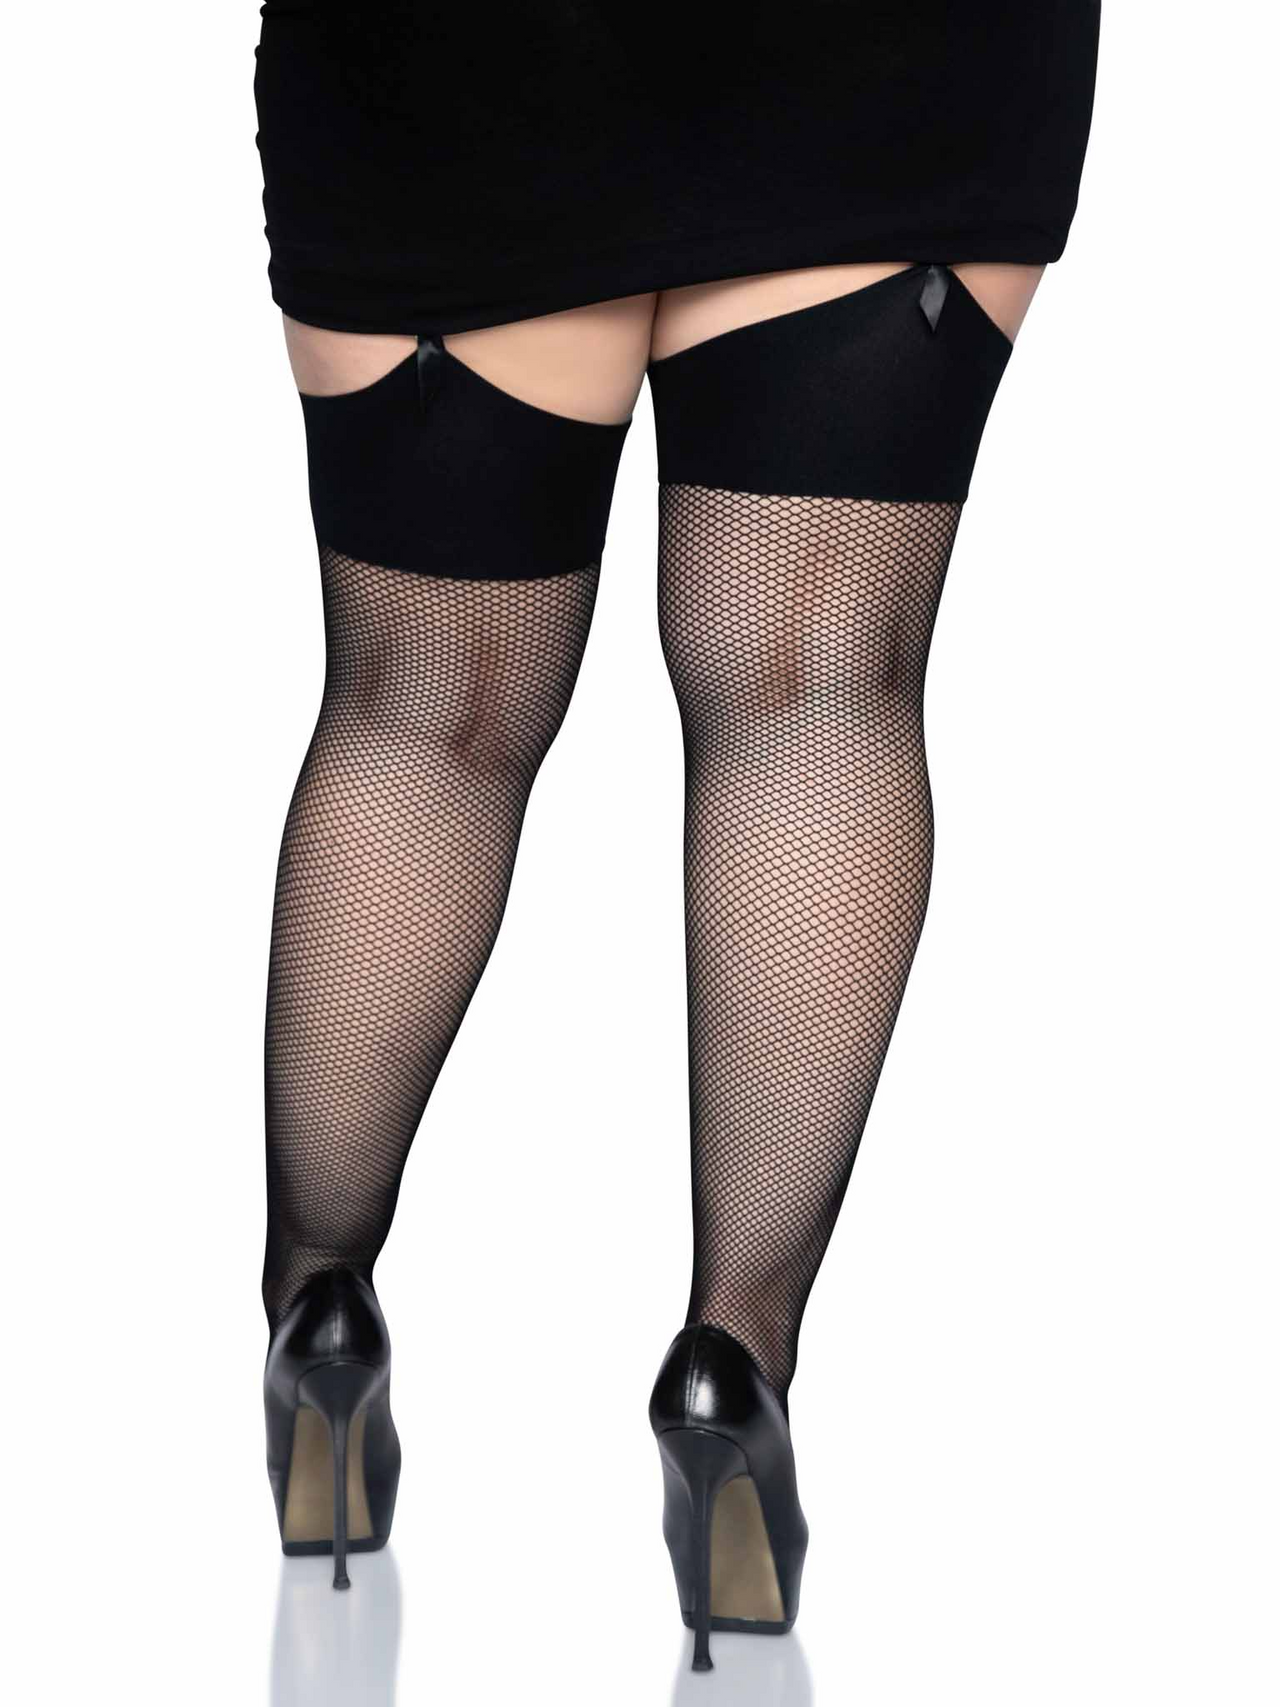 FISHNET THIGH HIGH STOCKINGS W/ WIDE BAND 2X